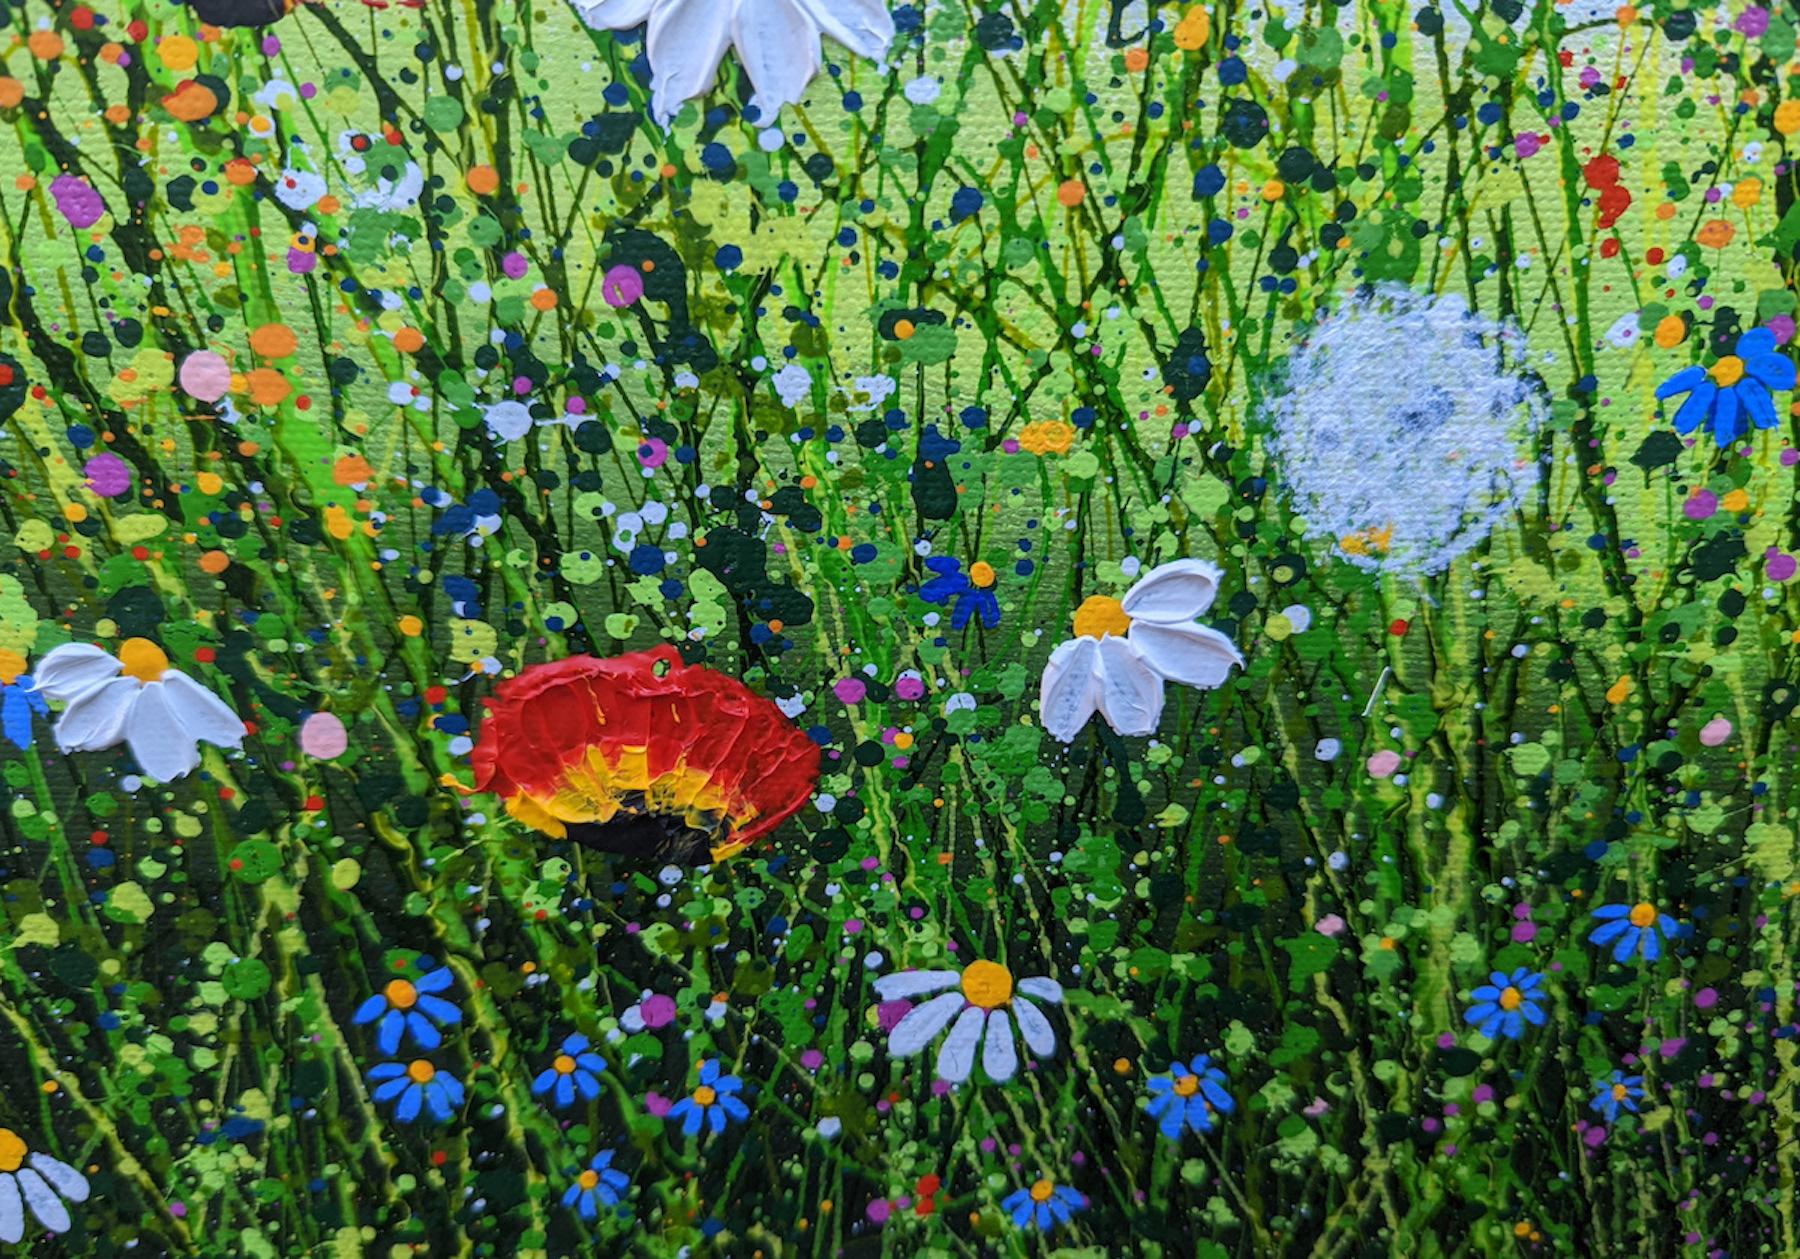 Where Wild Meadows Whisper #2 – By Lucy Moore [2022]
original and hand signed by the artist 
Acrylic on canvas
Image size: H:60 cm x W:97 cm
Complete Size of Unframed Work: H:60 cm x W:97 cm x D:1.9cm
Sold Unframed
Please note that insitu images are